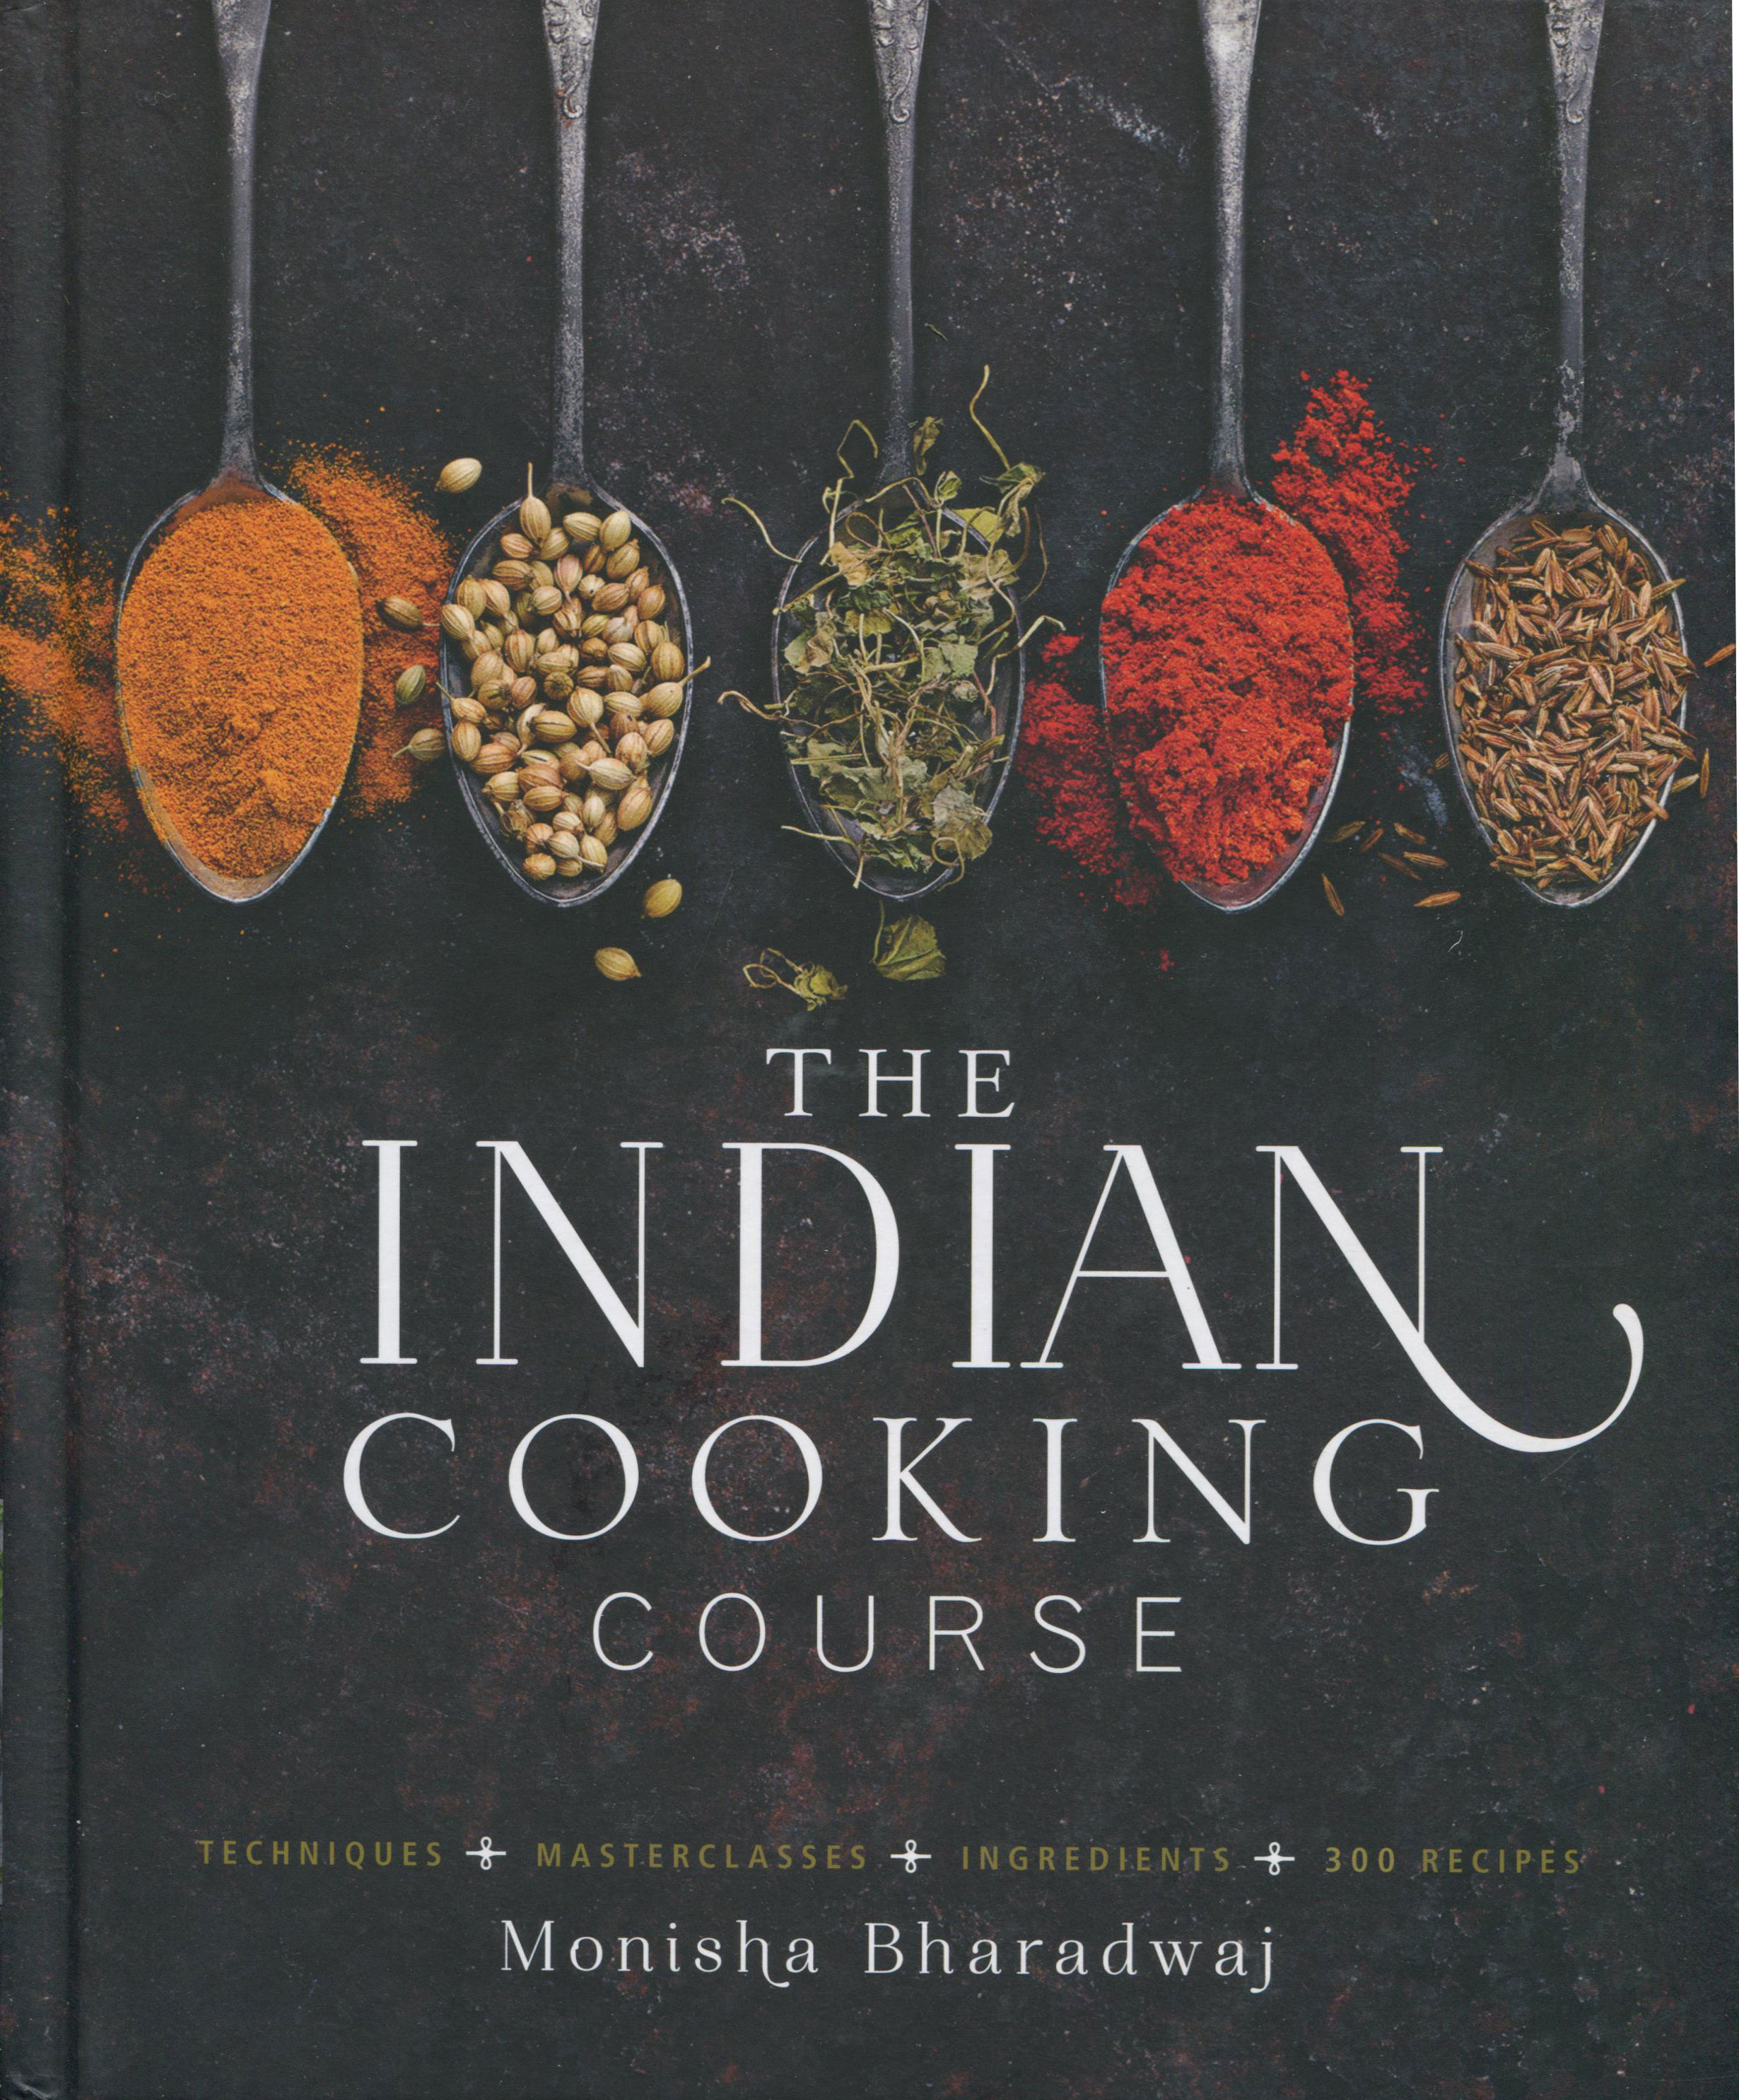 Cookbook Review: The Indian Cooking Course by Monisha Bharadwaj